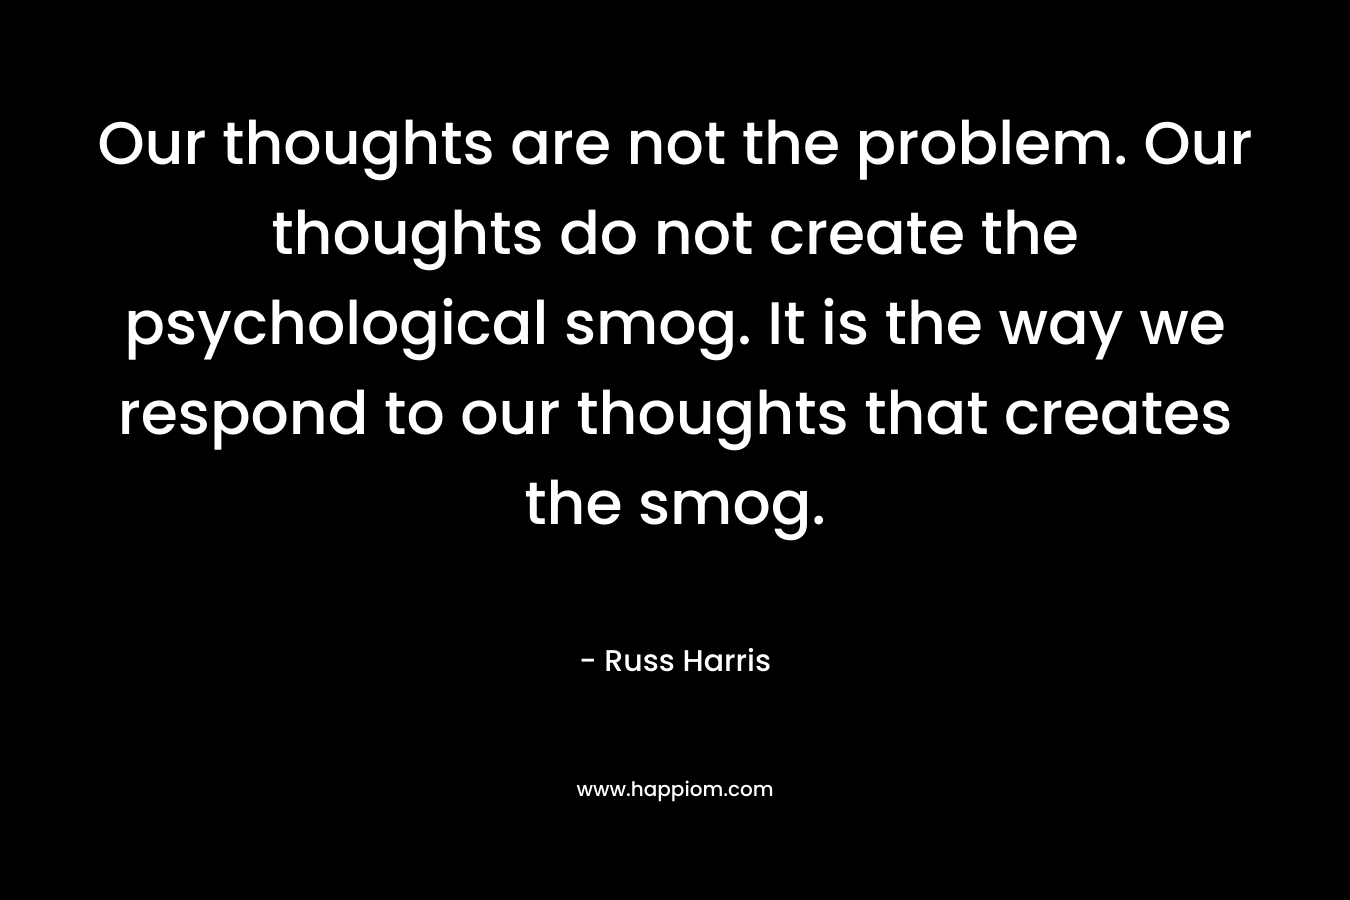 Our thoughts are not the problem. Our thoughts do not create the psychological smog. It is the way we respond to our thoughts that creates the smog.